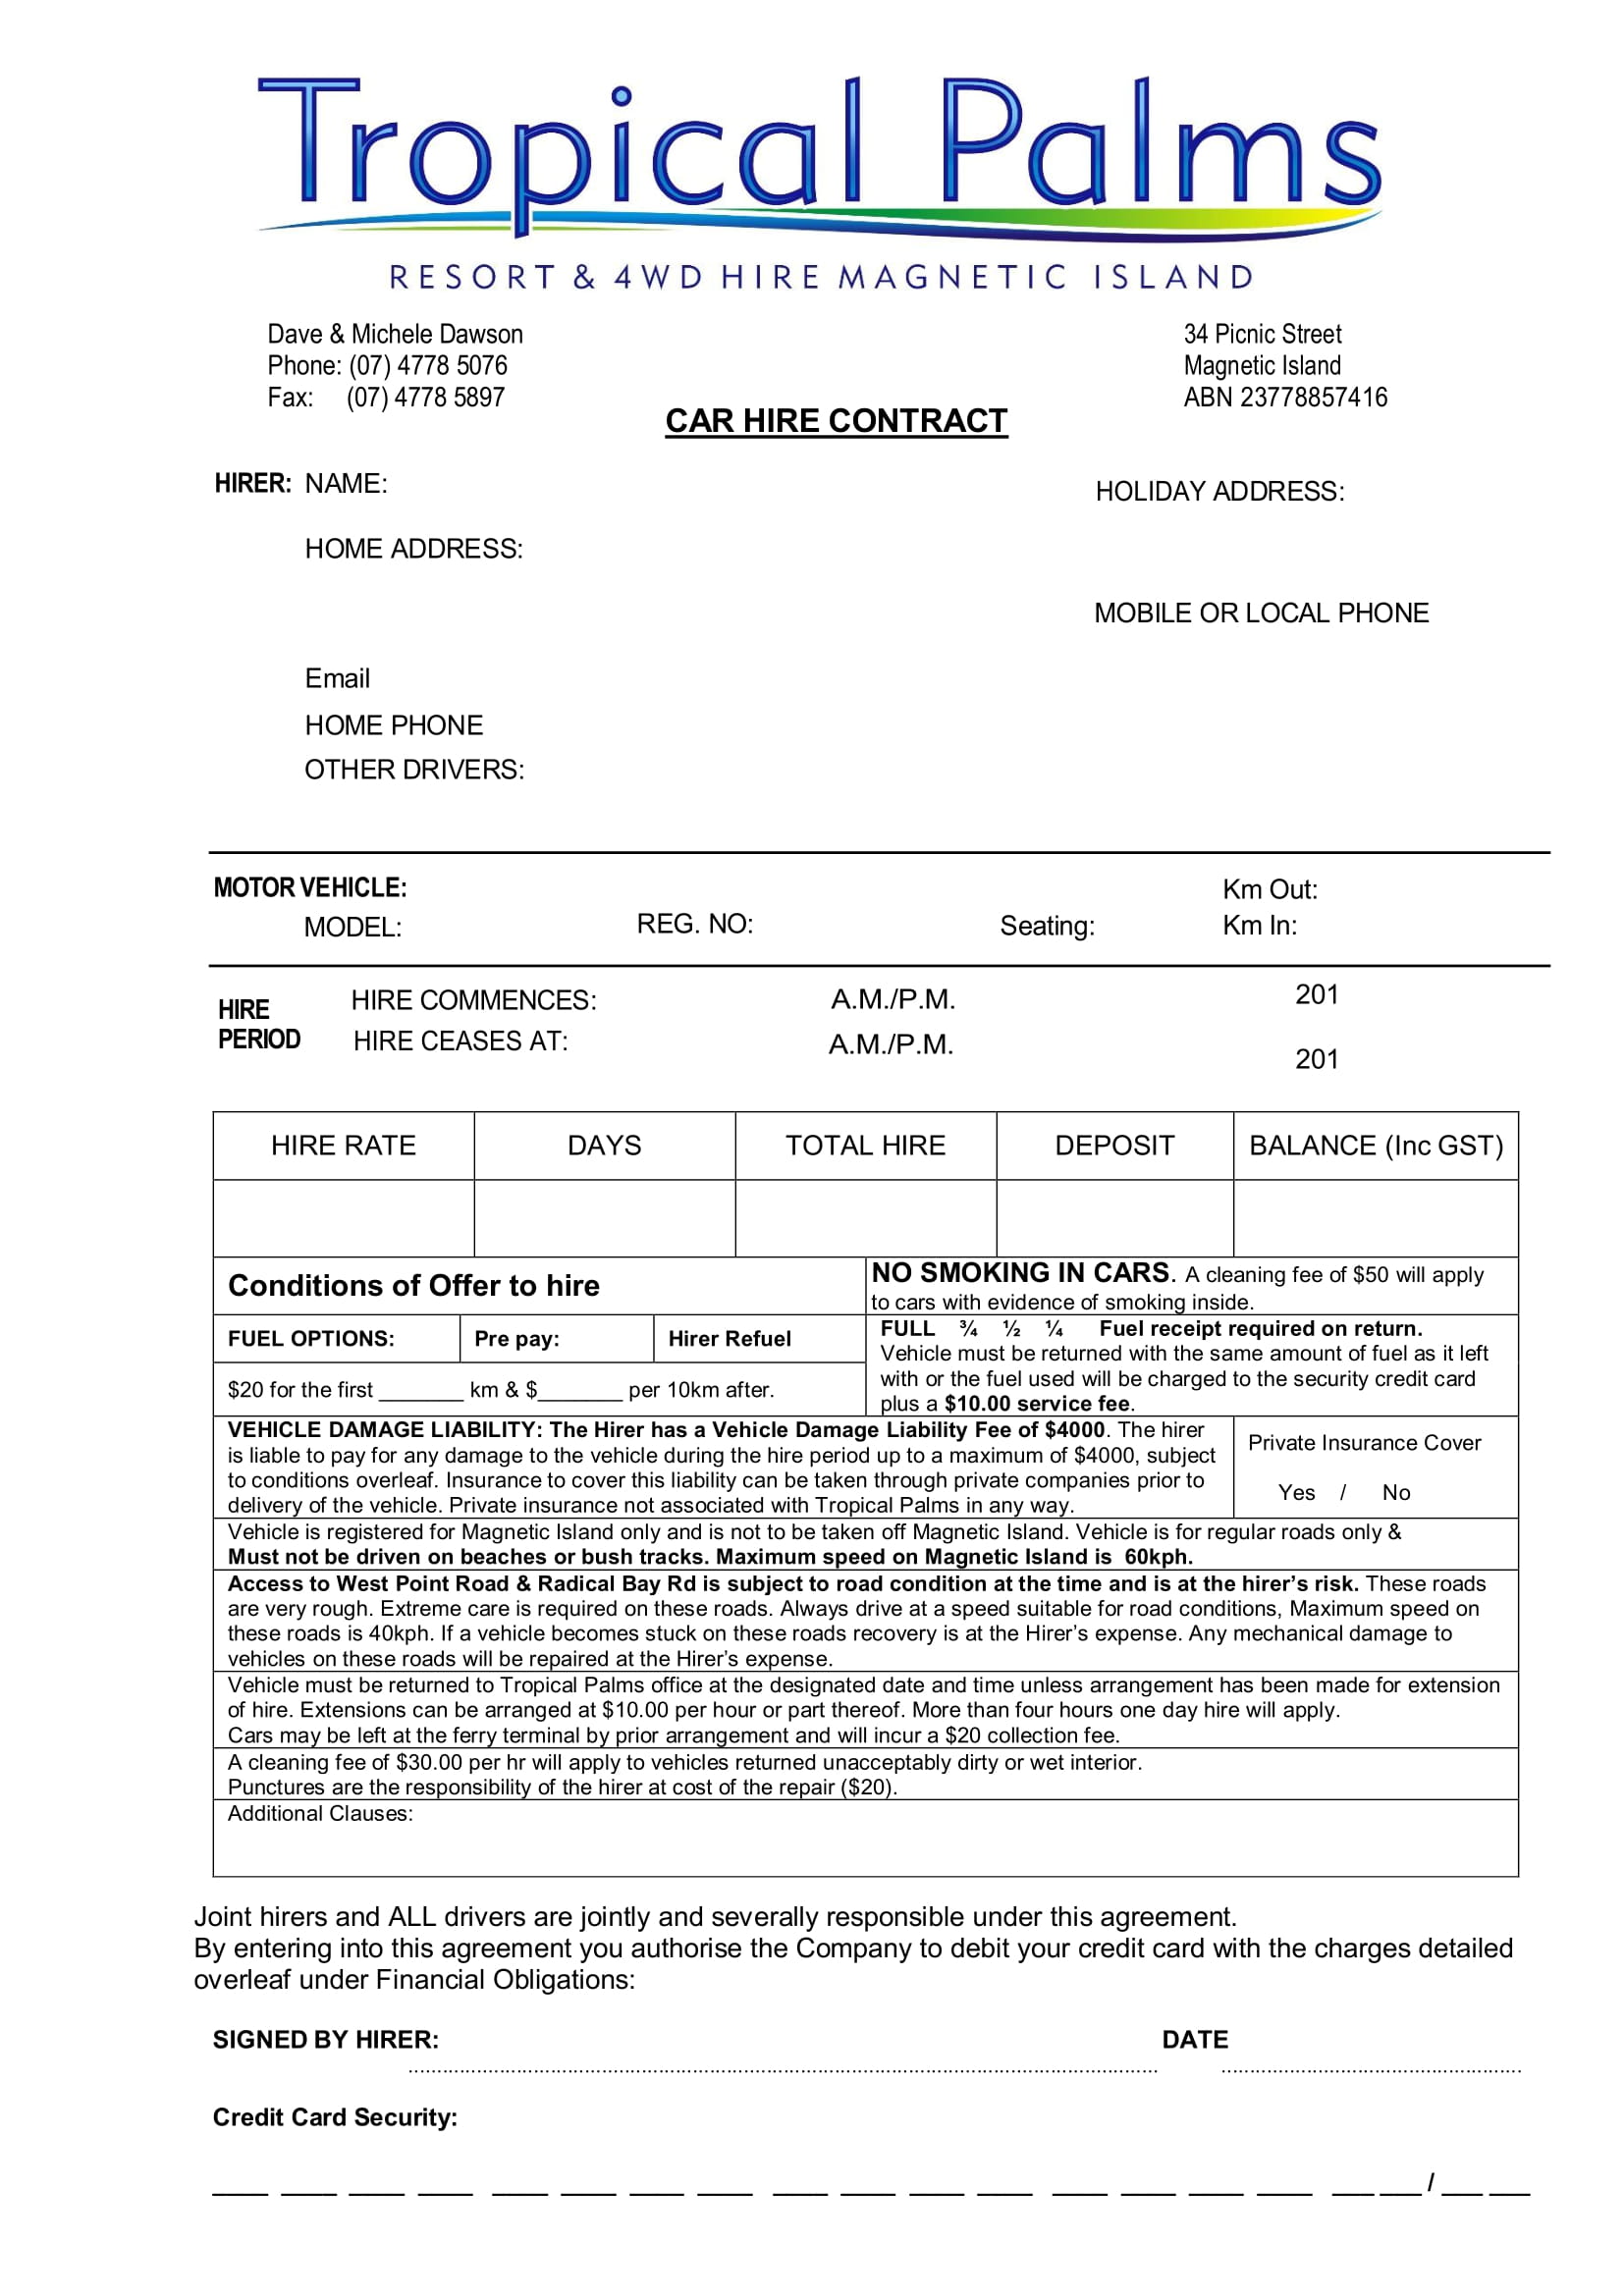 car hire contract form 1